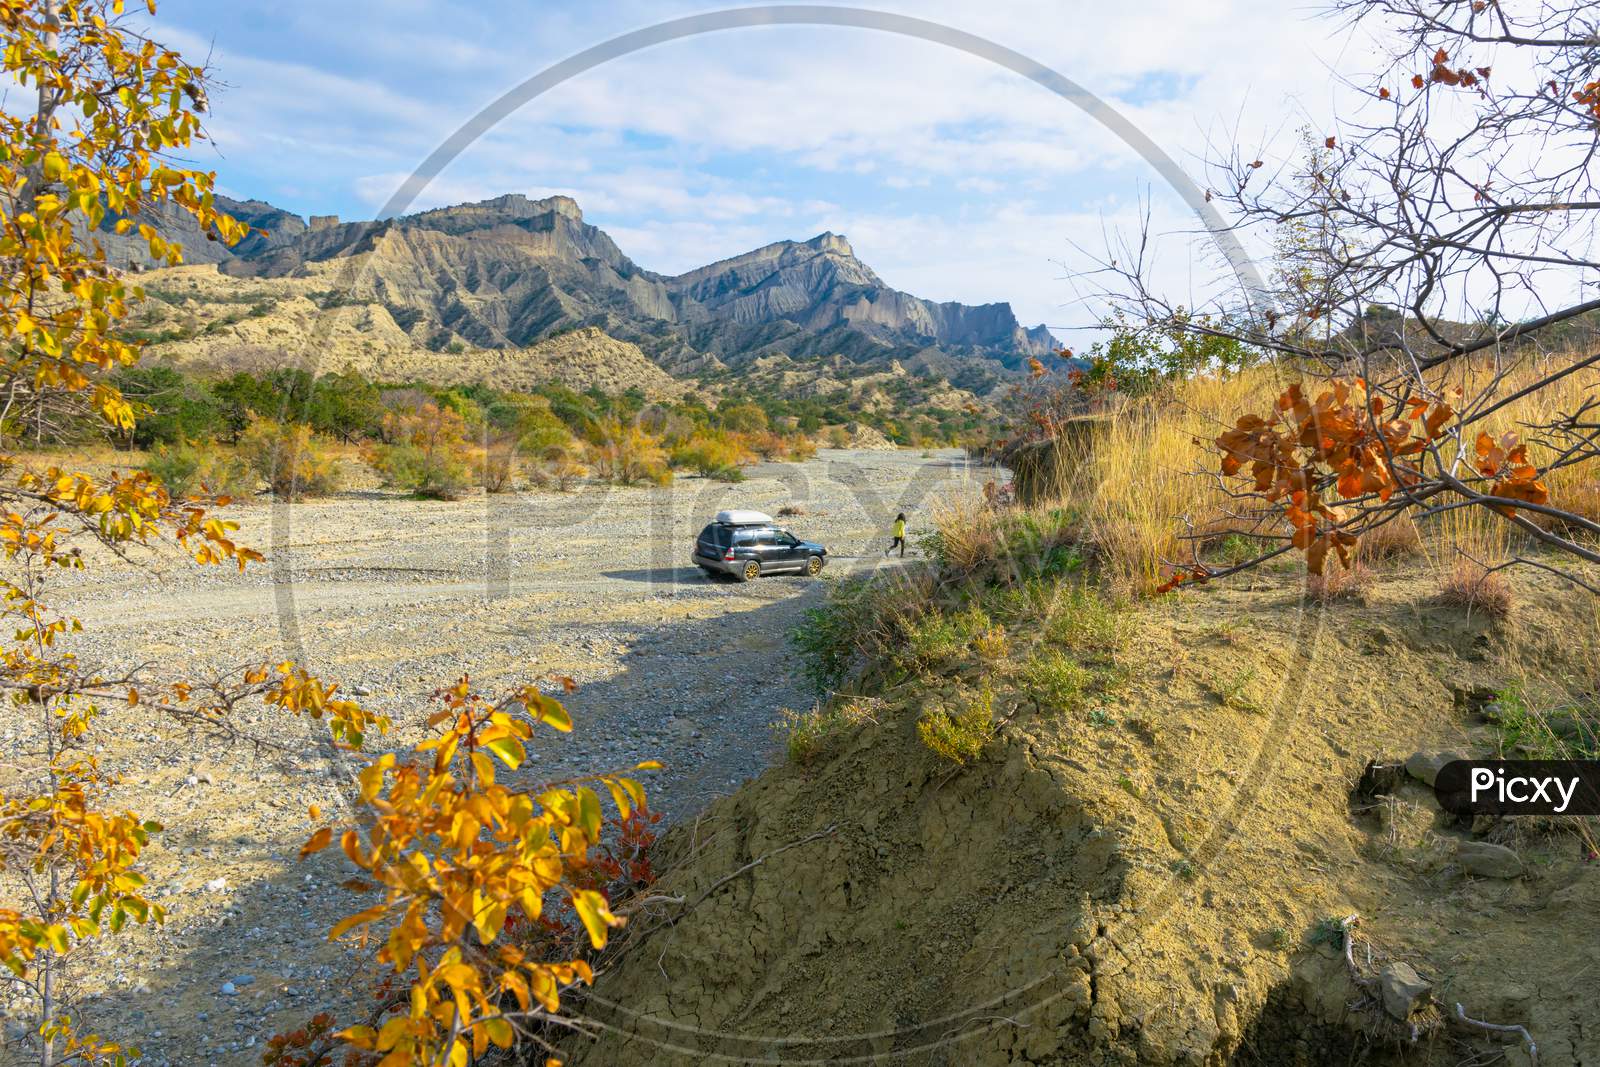 Person Walks From The 4Wd Car On Dry River Road Surounded By Autumn Nature And Stunning Landscape In Vashlovani National Park